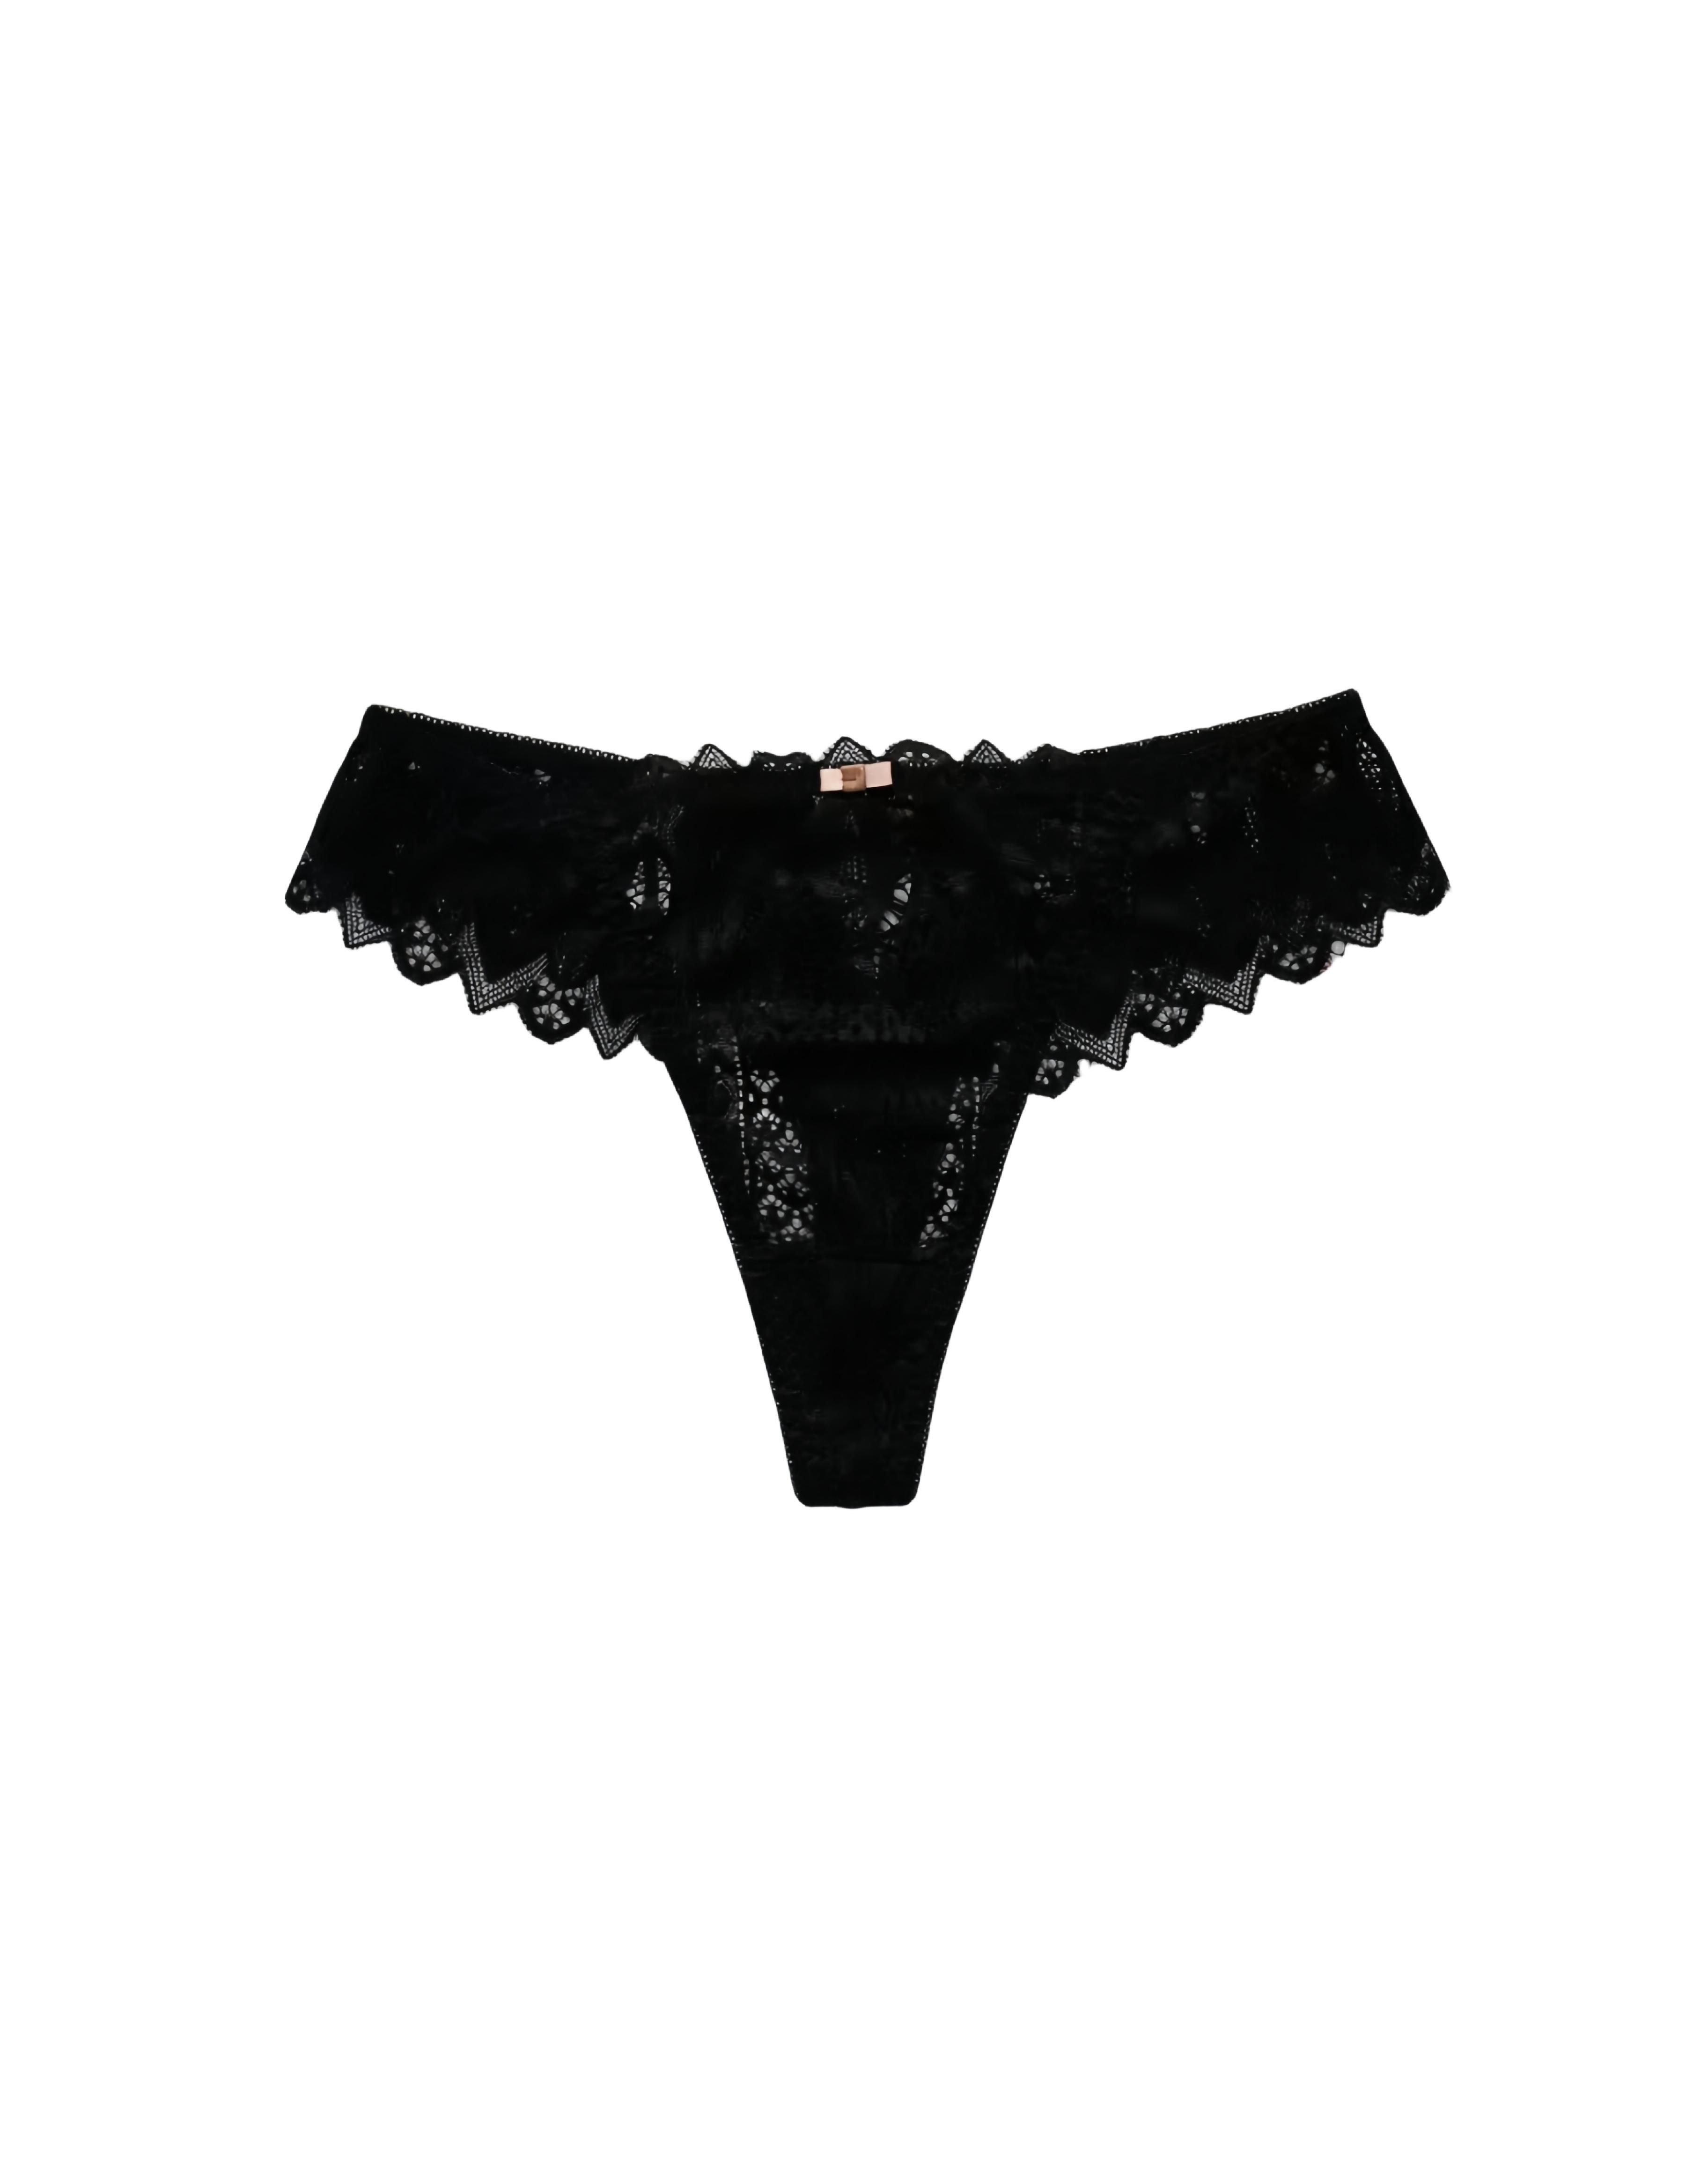 Sexy Floral Lace Thongs, Hollow Out Intimates Panties, Women's Lingerie & Underwear